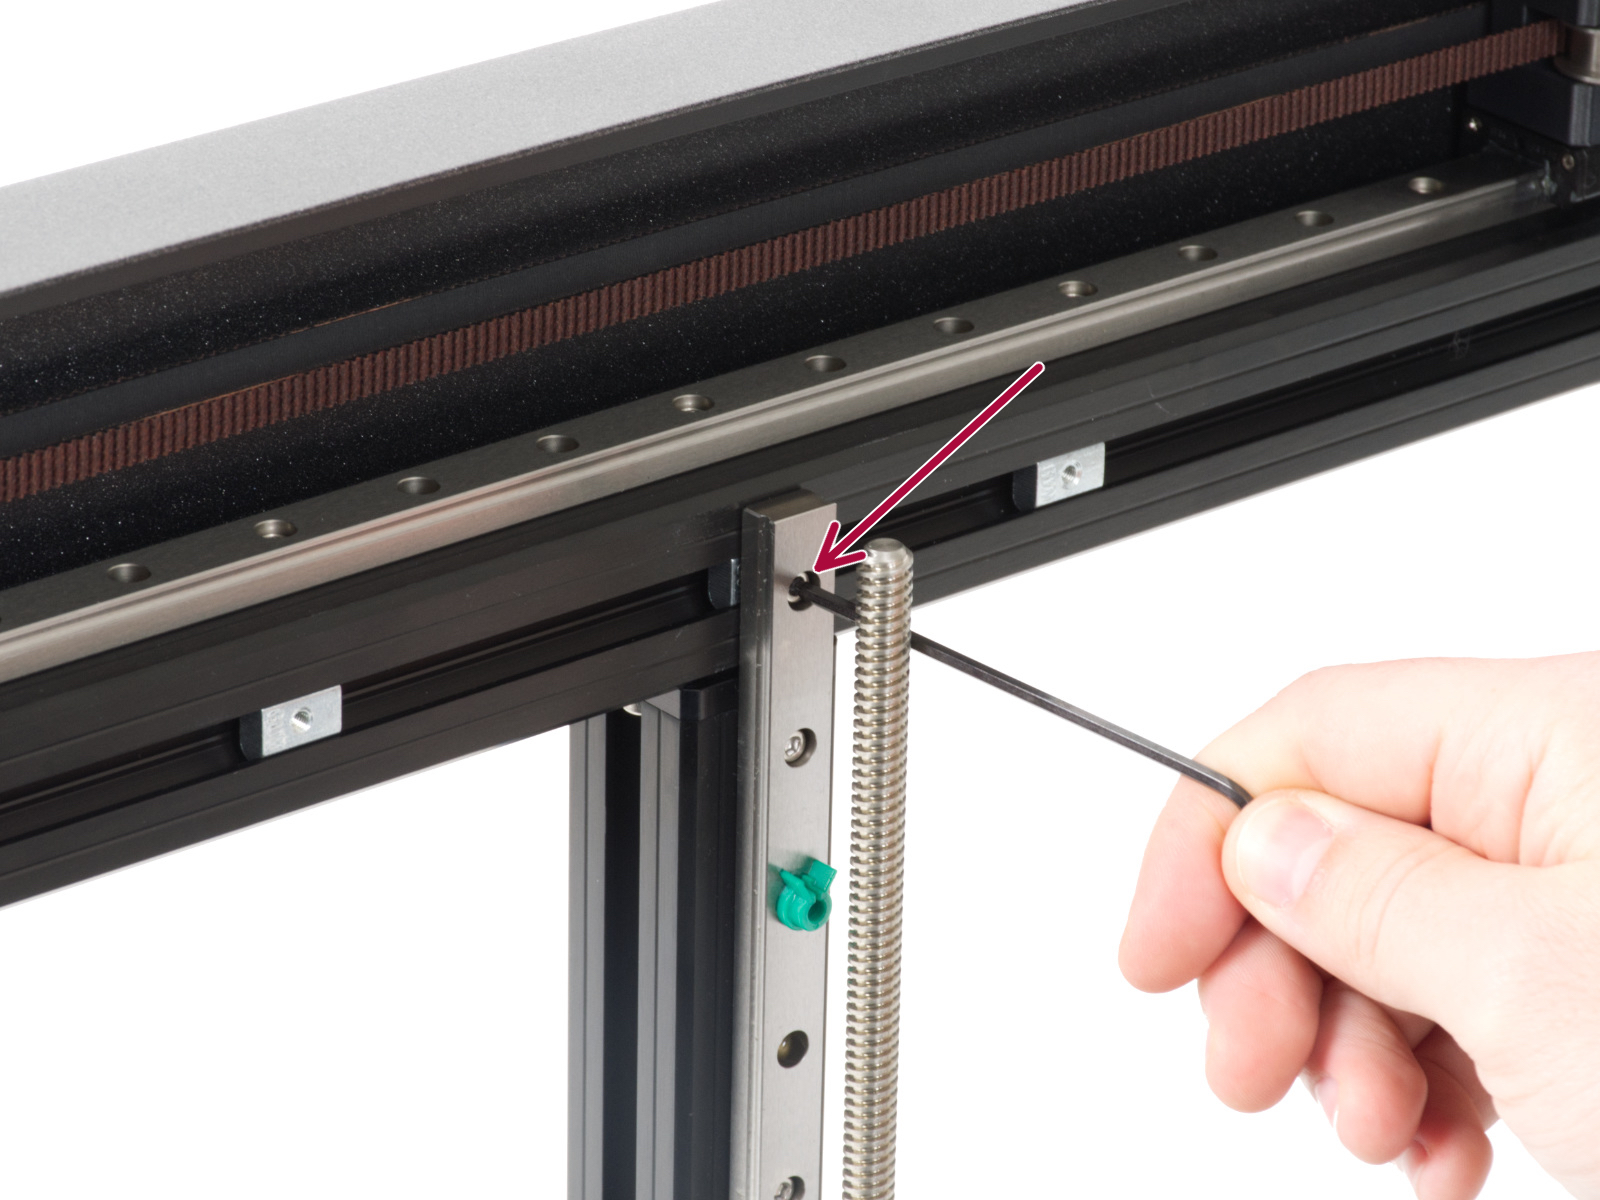 Securing the left linear rail